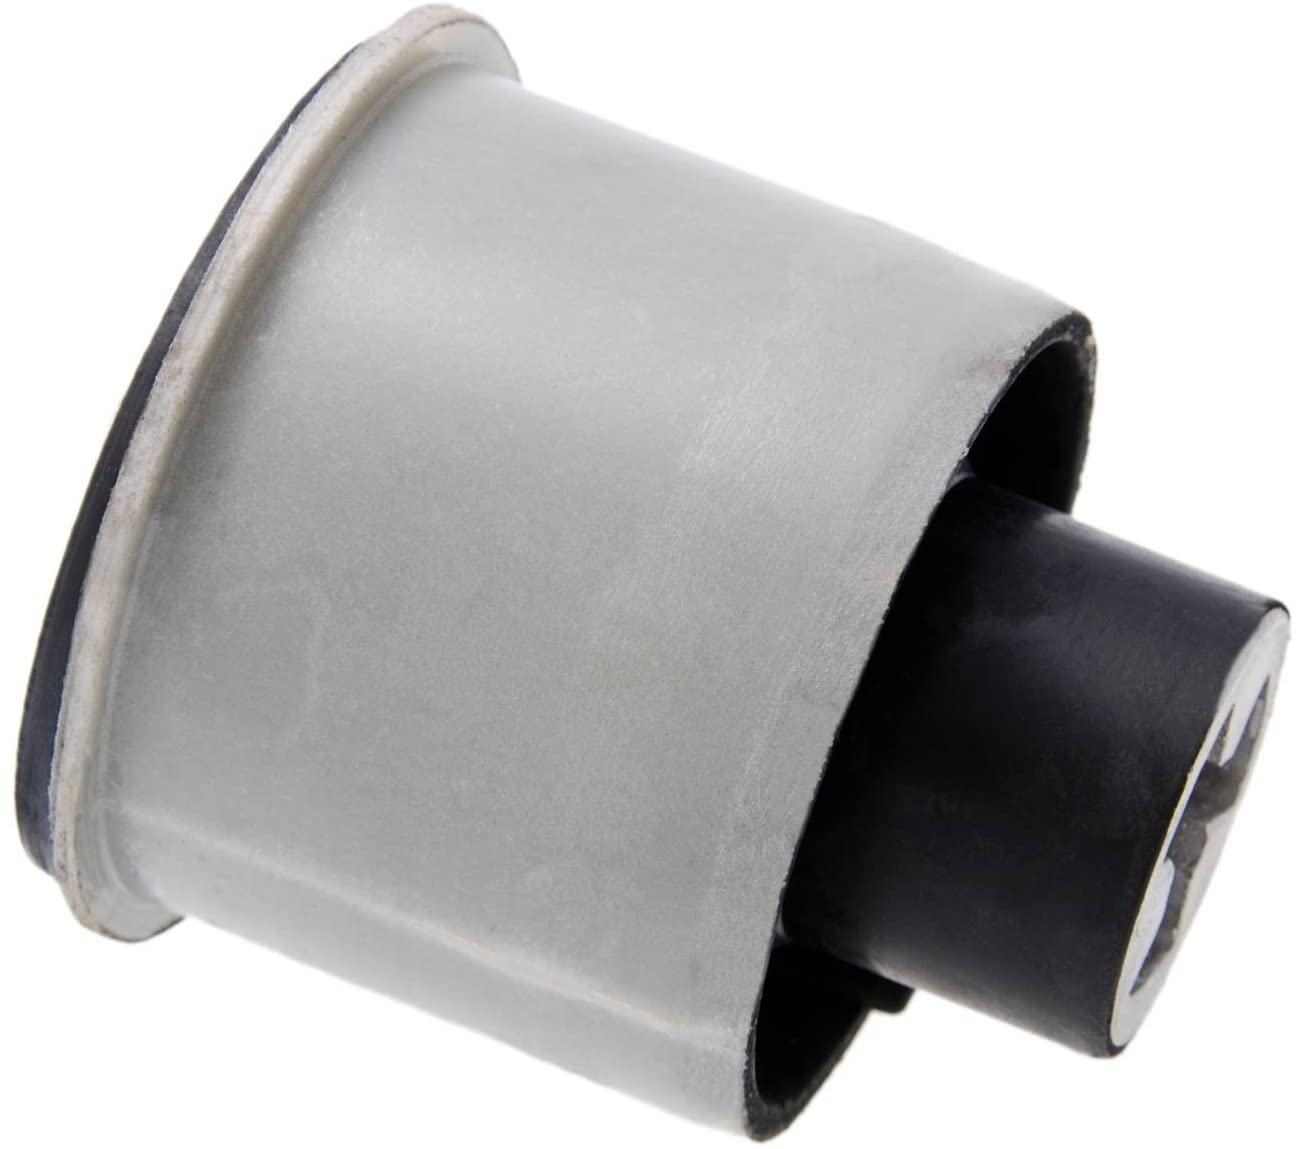 GJ Bush axle bushing cost for manufacturing plant-2